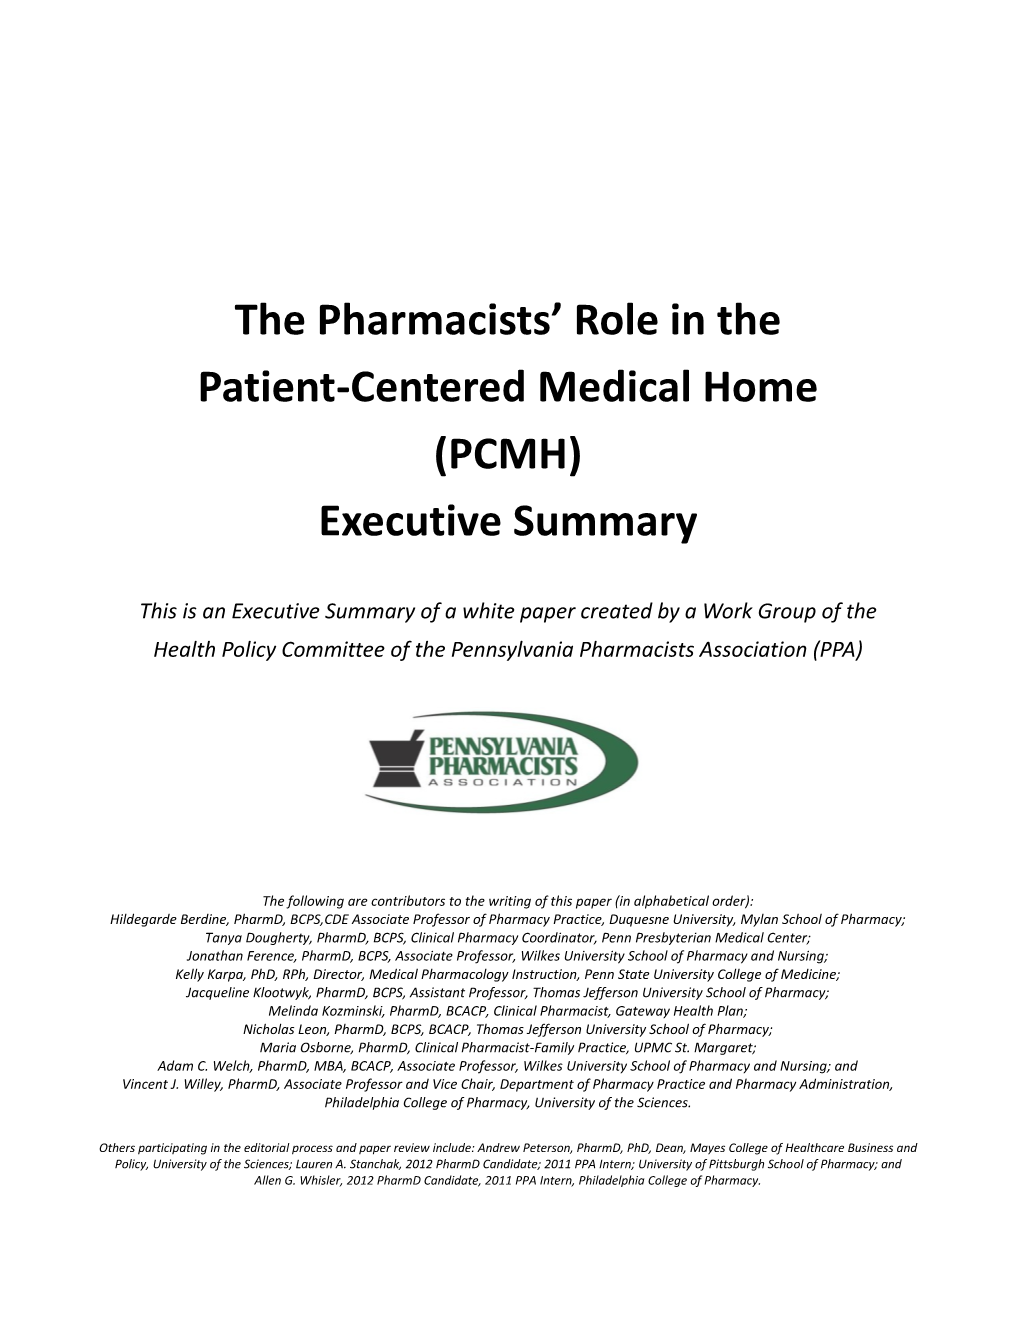 The Pharmacists' Role in the Patient-Centered Medical Home